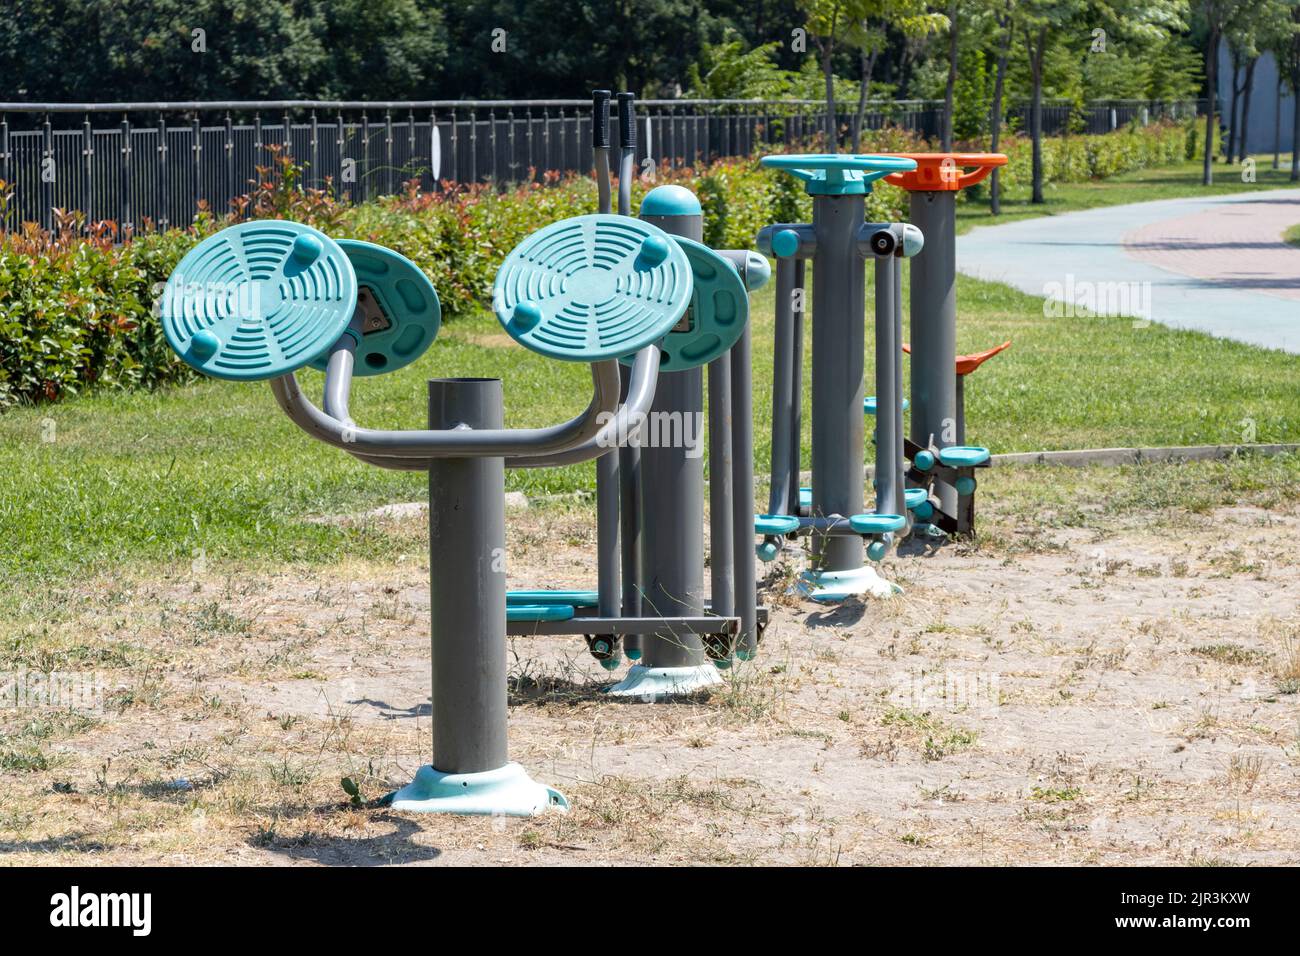 Conditioning and sports equipment in the public park outdoors. Stock Photo